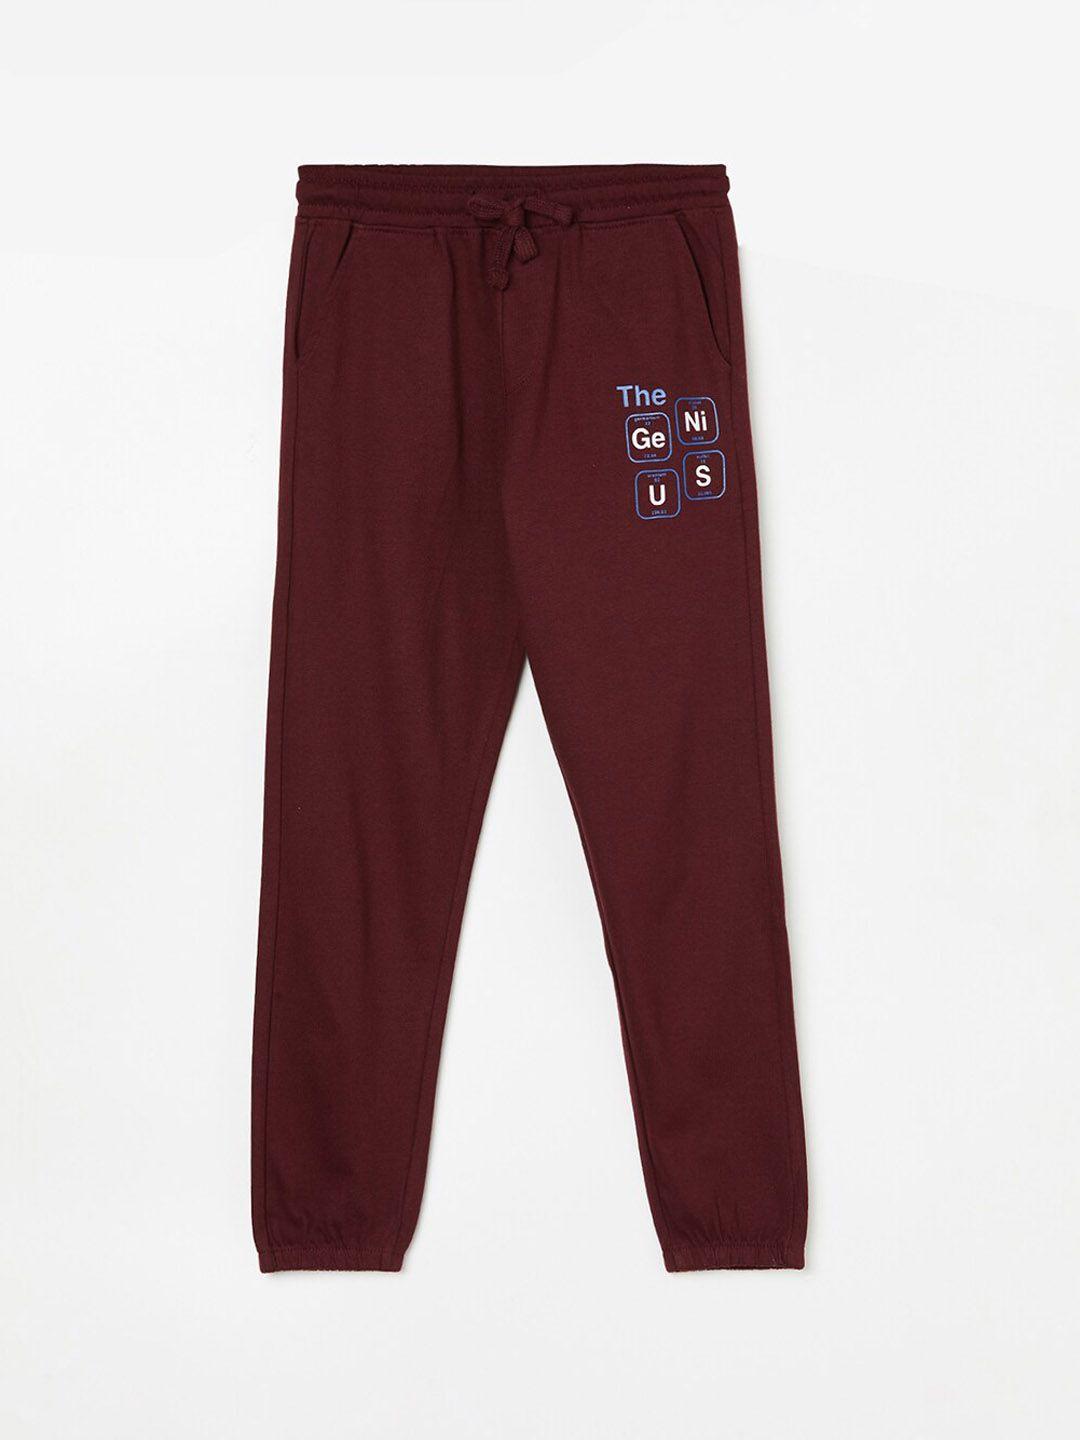 fame forever by lifestyle boys typography printed pure cotton track pants